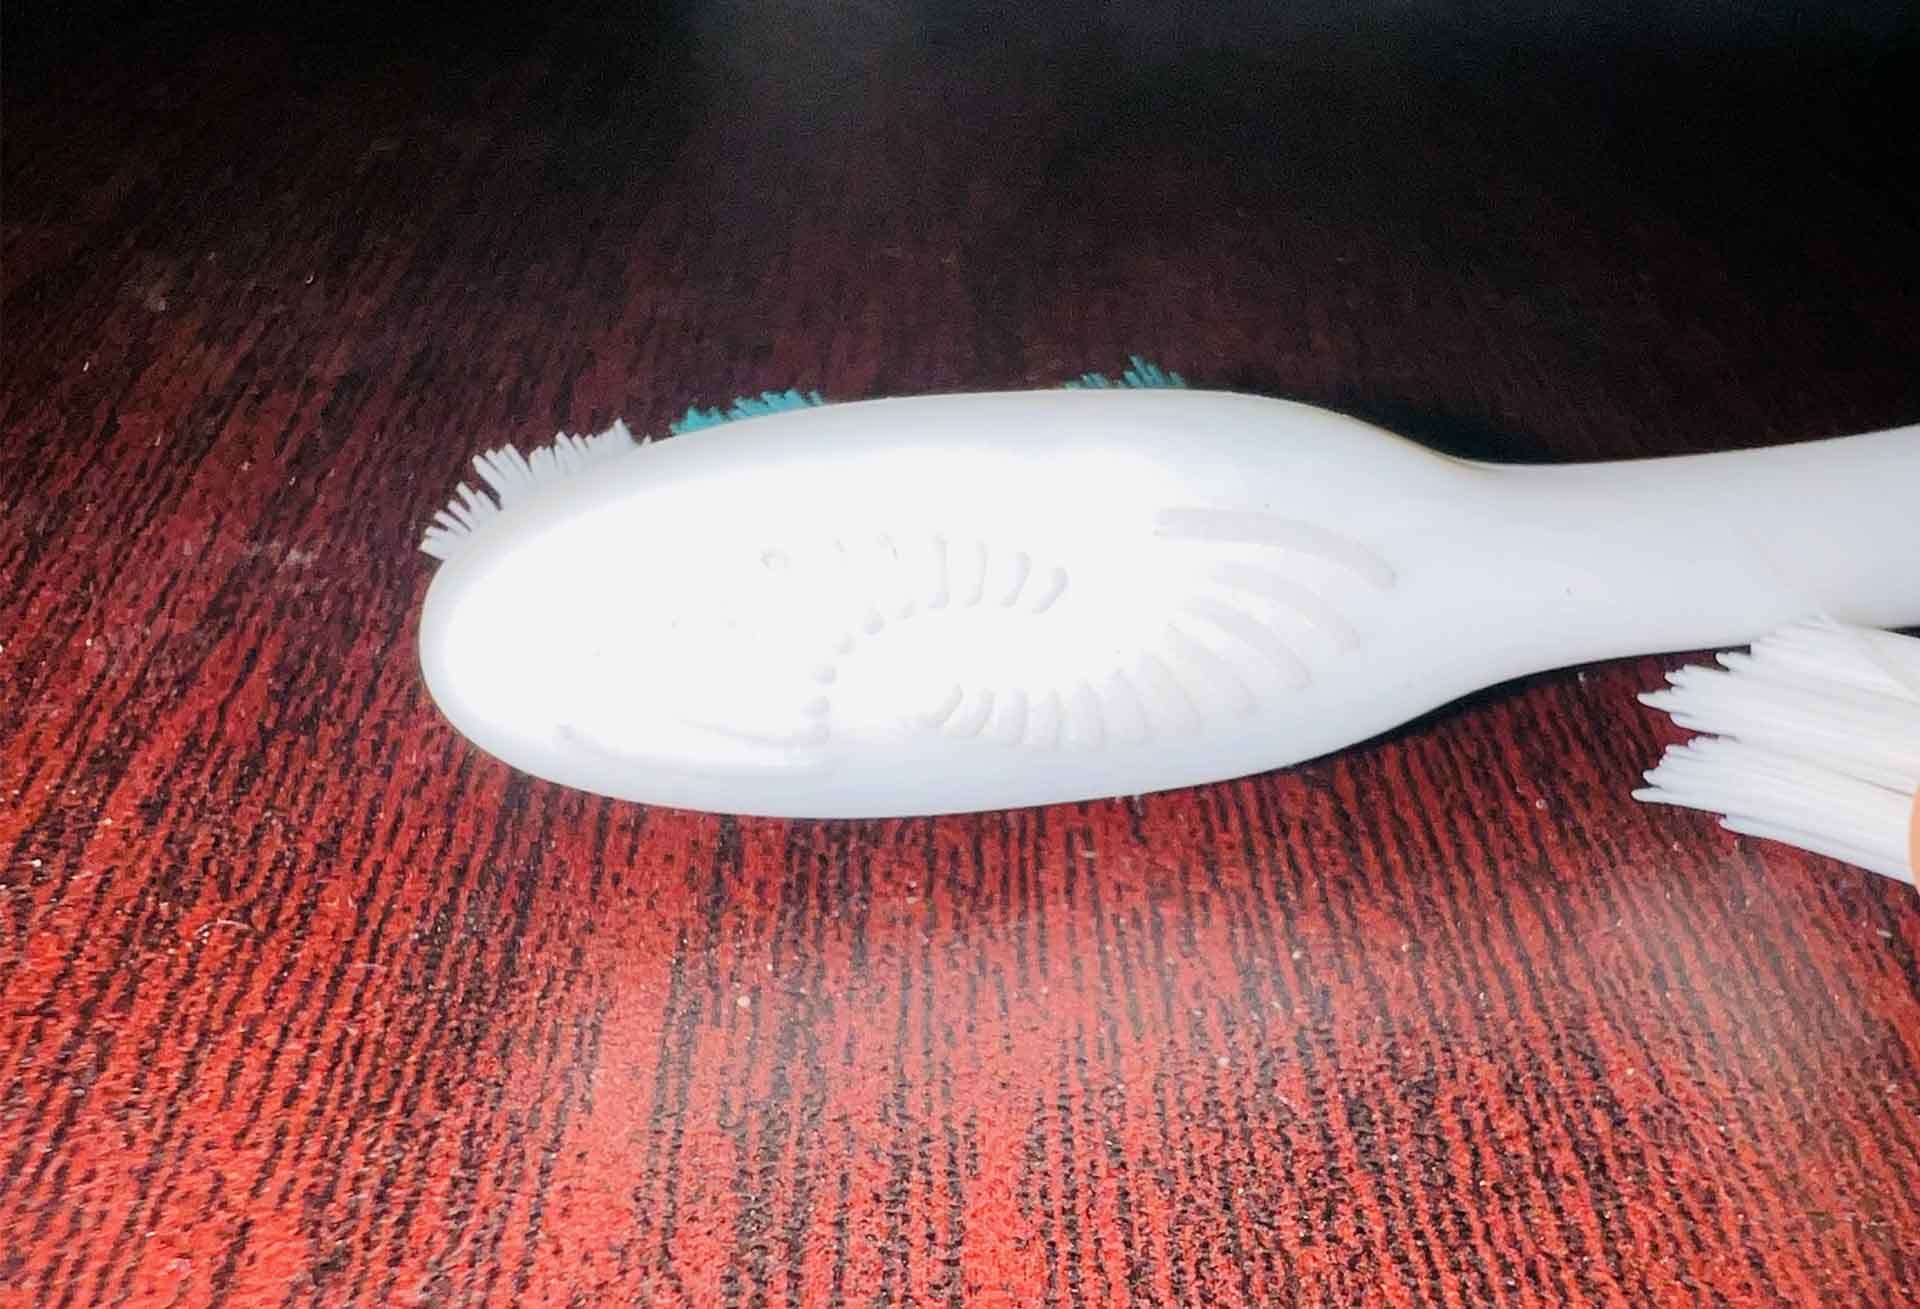 What Is The Back Of The Toothbrush For